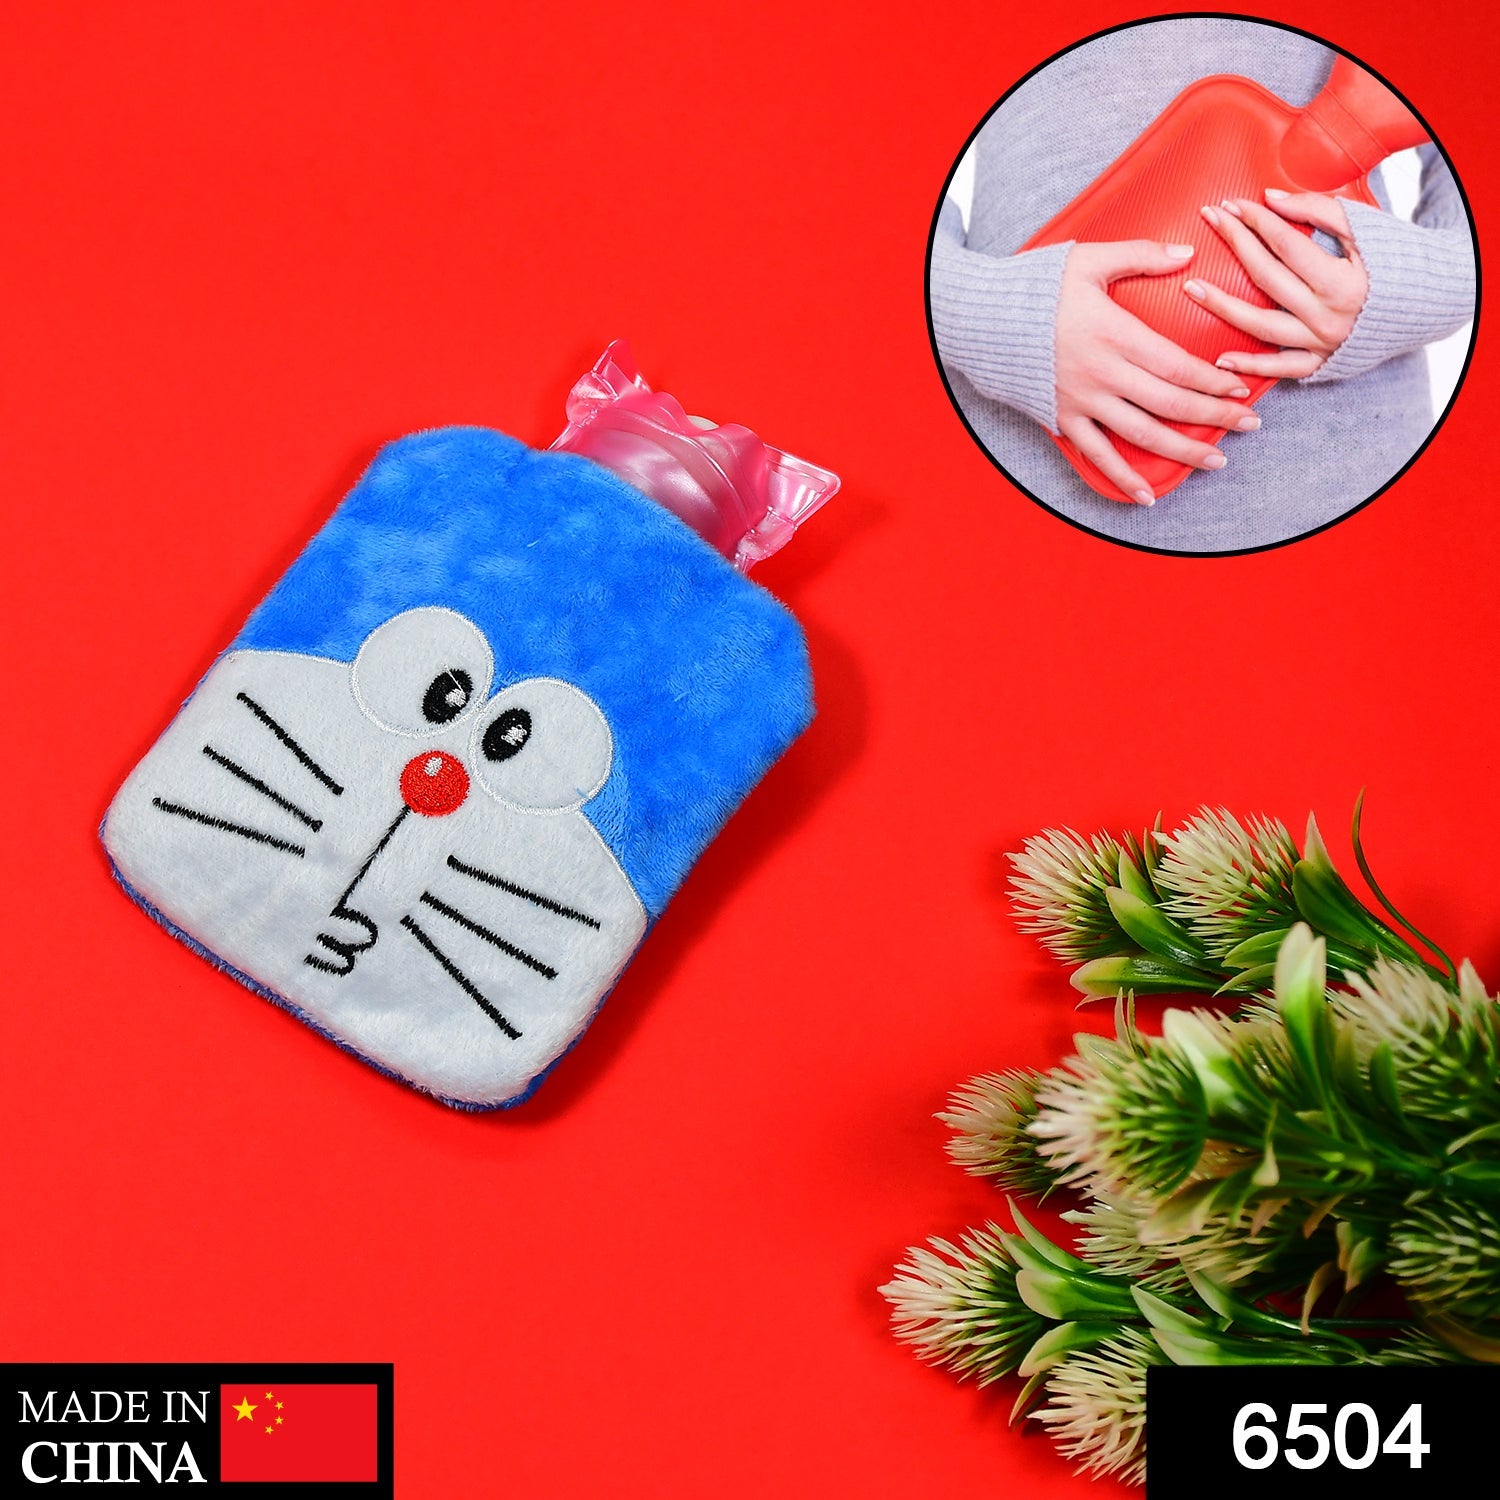 6504 Doremon small Hot Water Bag with Cover for Pain Relief, Neck, Shoulder Pain and Hand, Feet Warmer, Menstrual Cramps. 